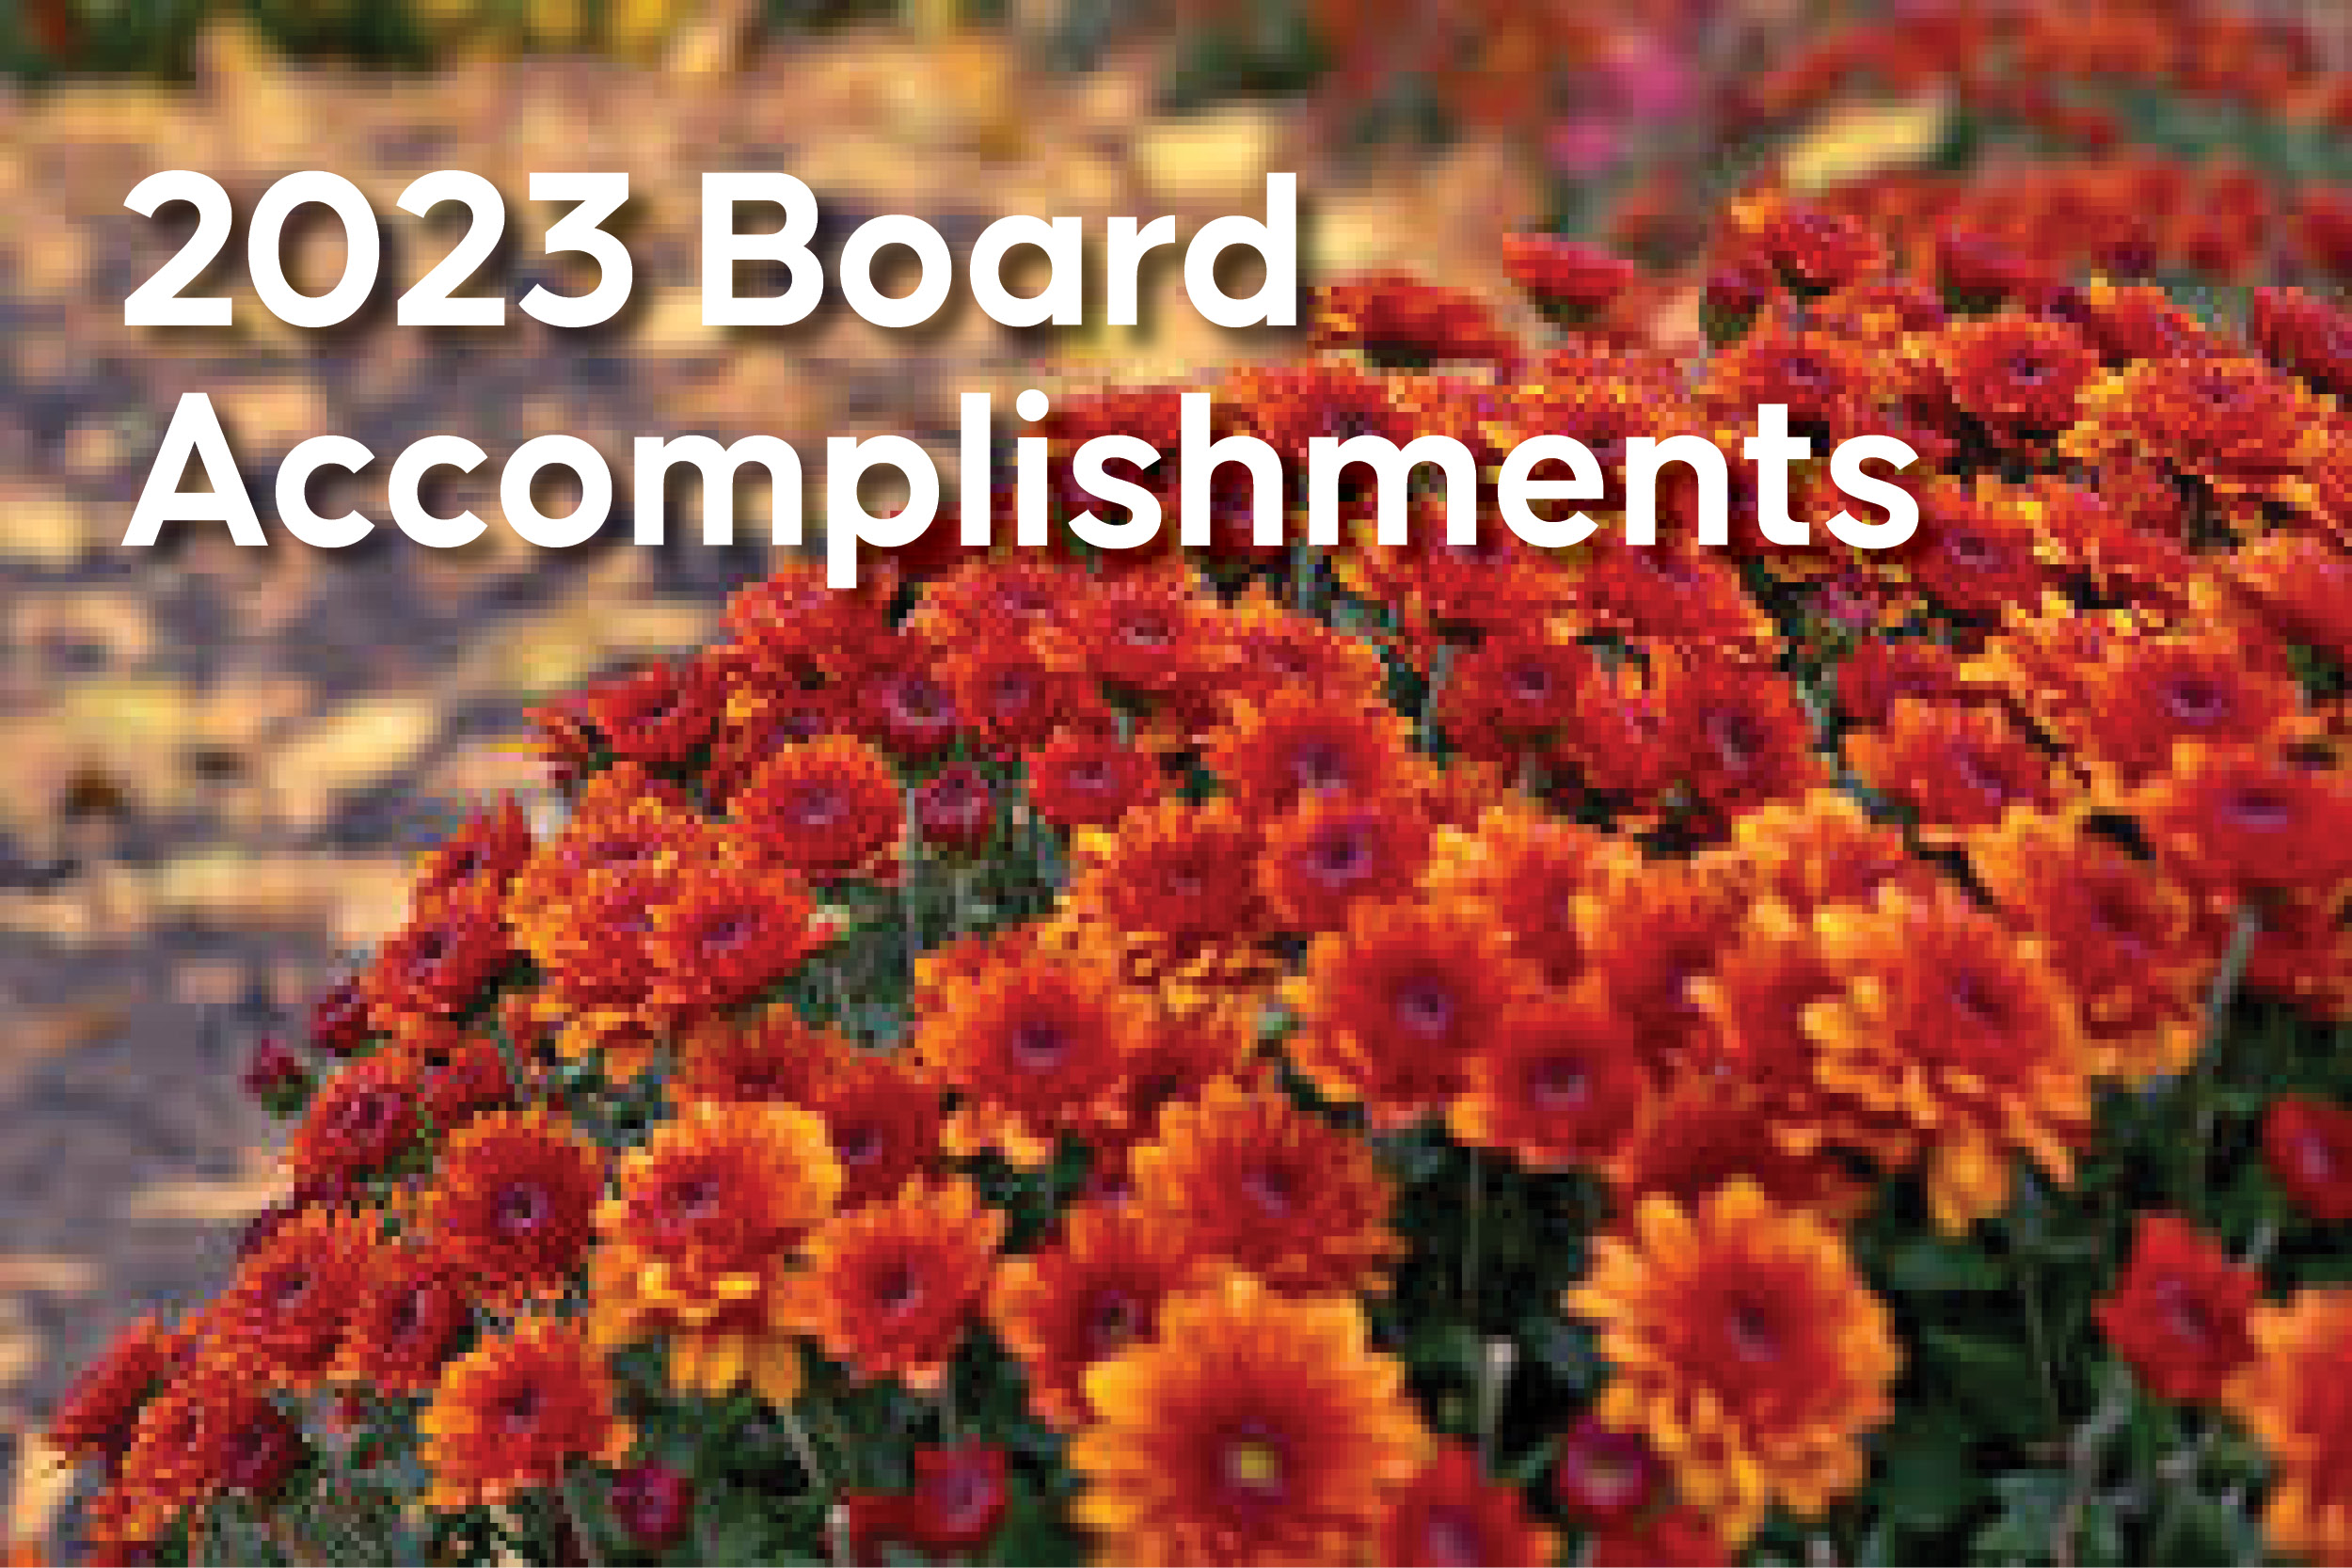 Governor's Place 2023 Board Accomplishments